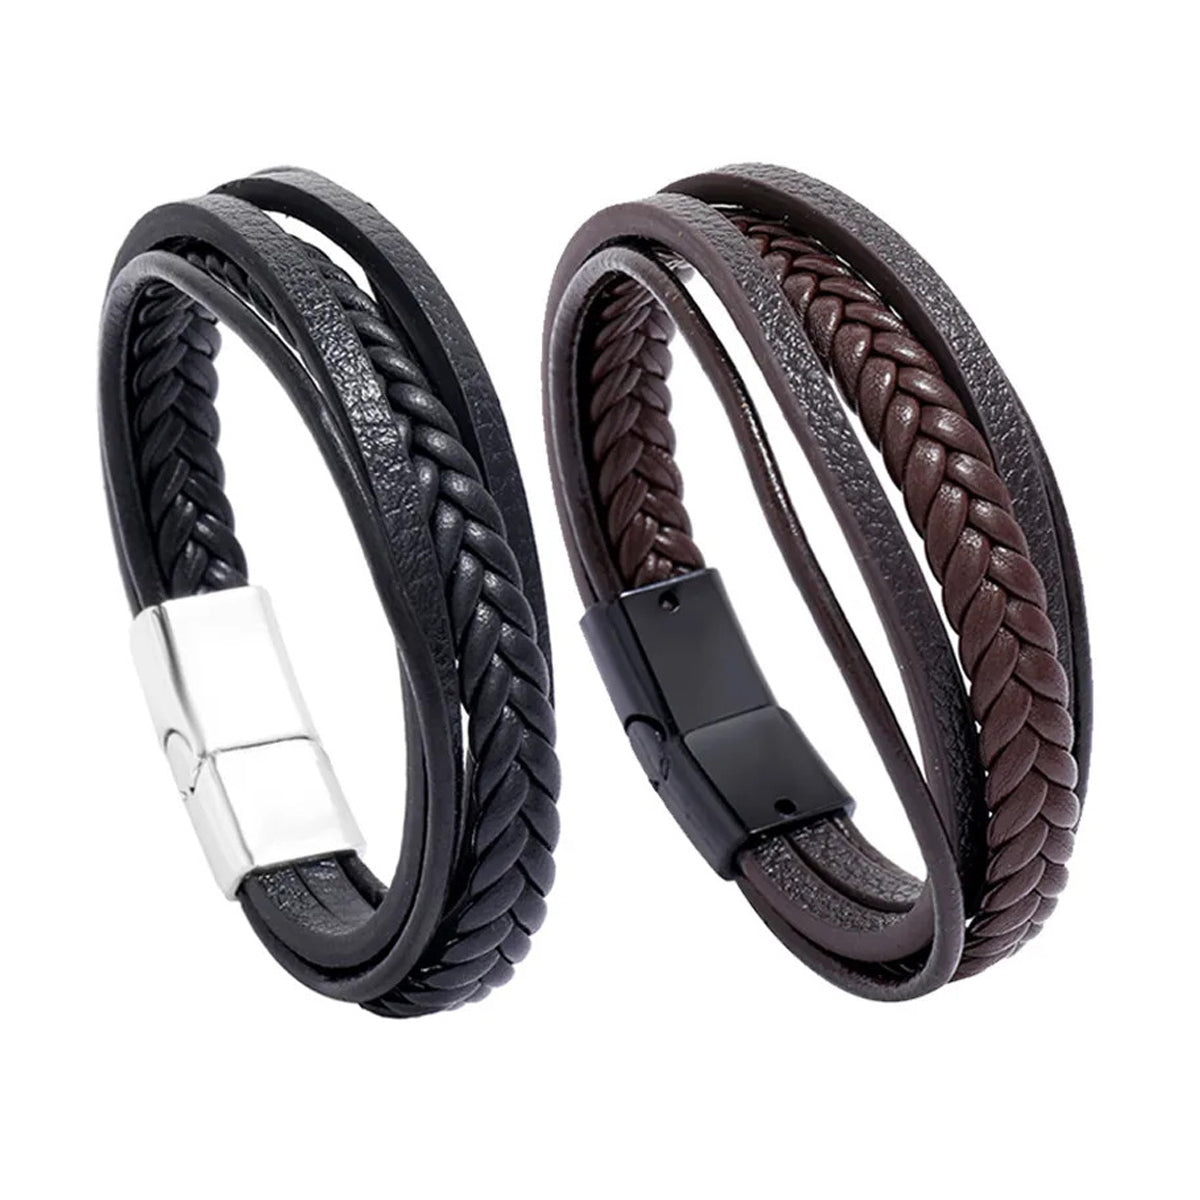 Men's Double Braided Royal Blue Leather Stainless Steel Bracelet